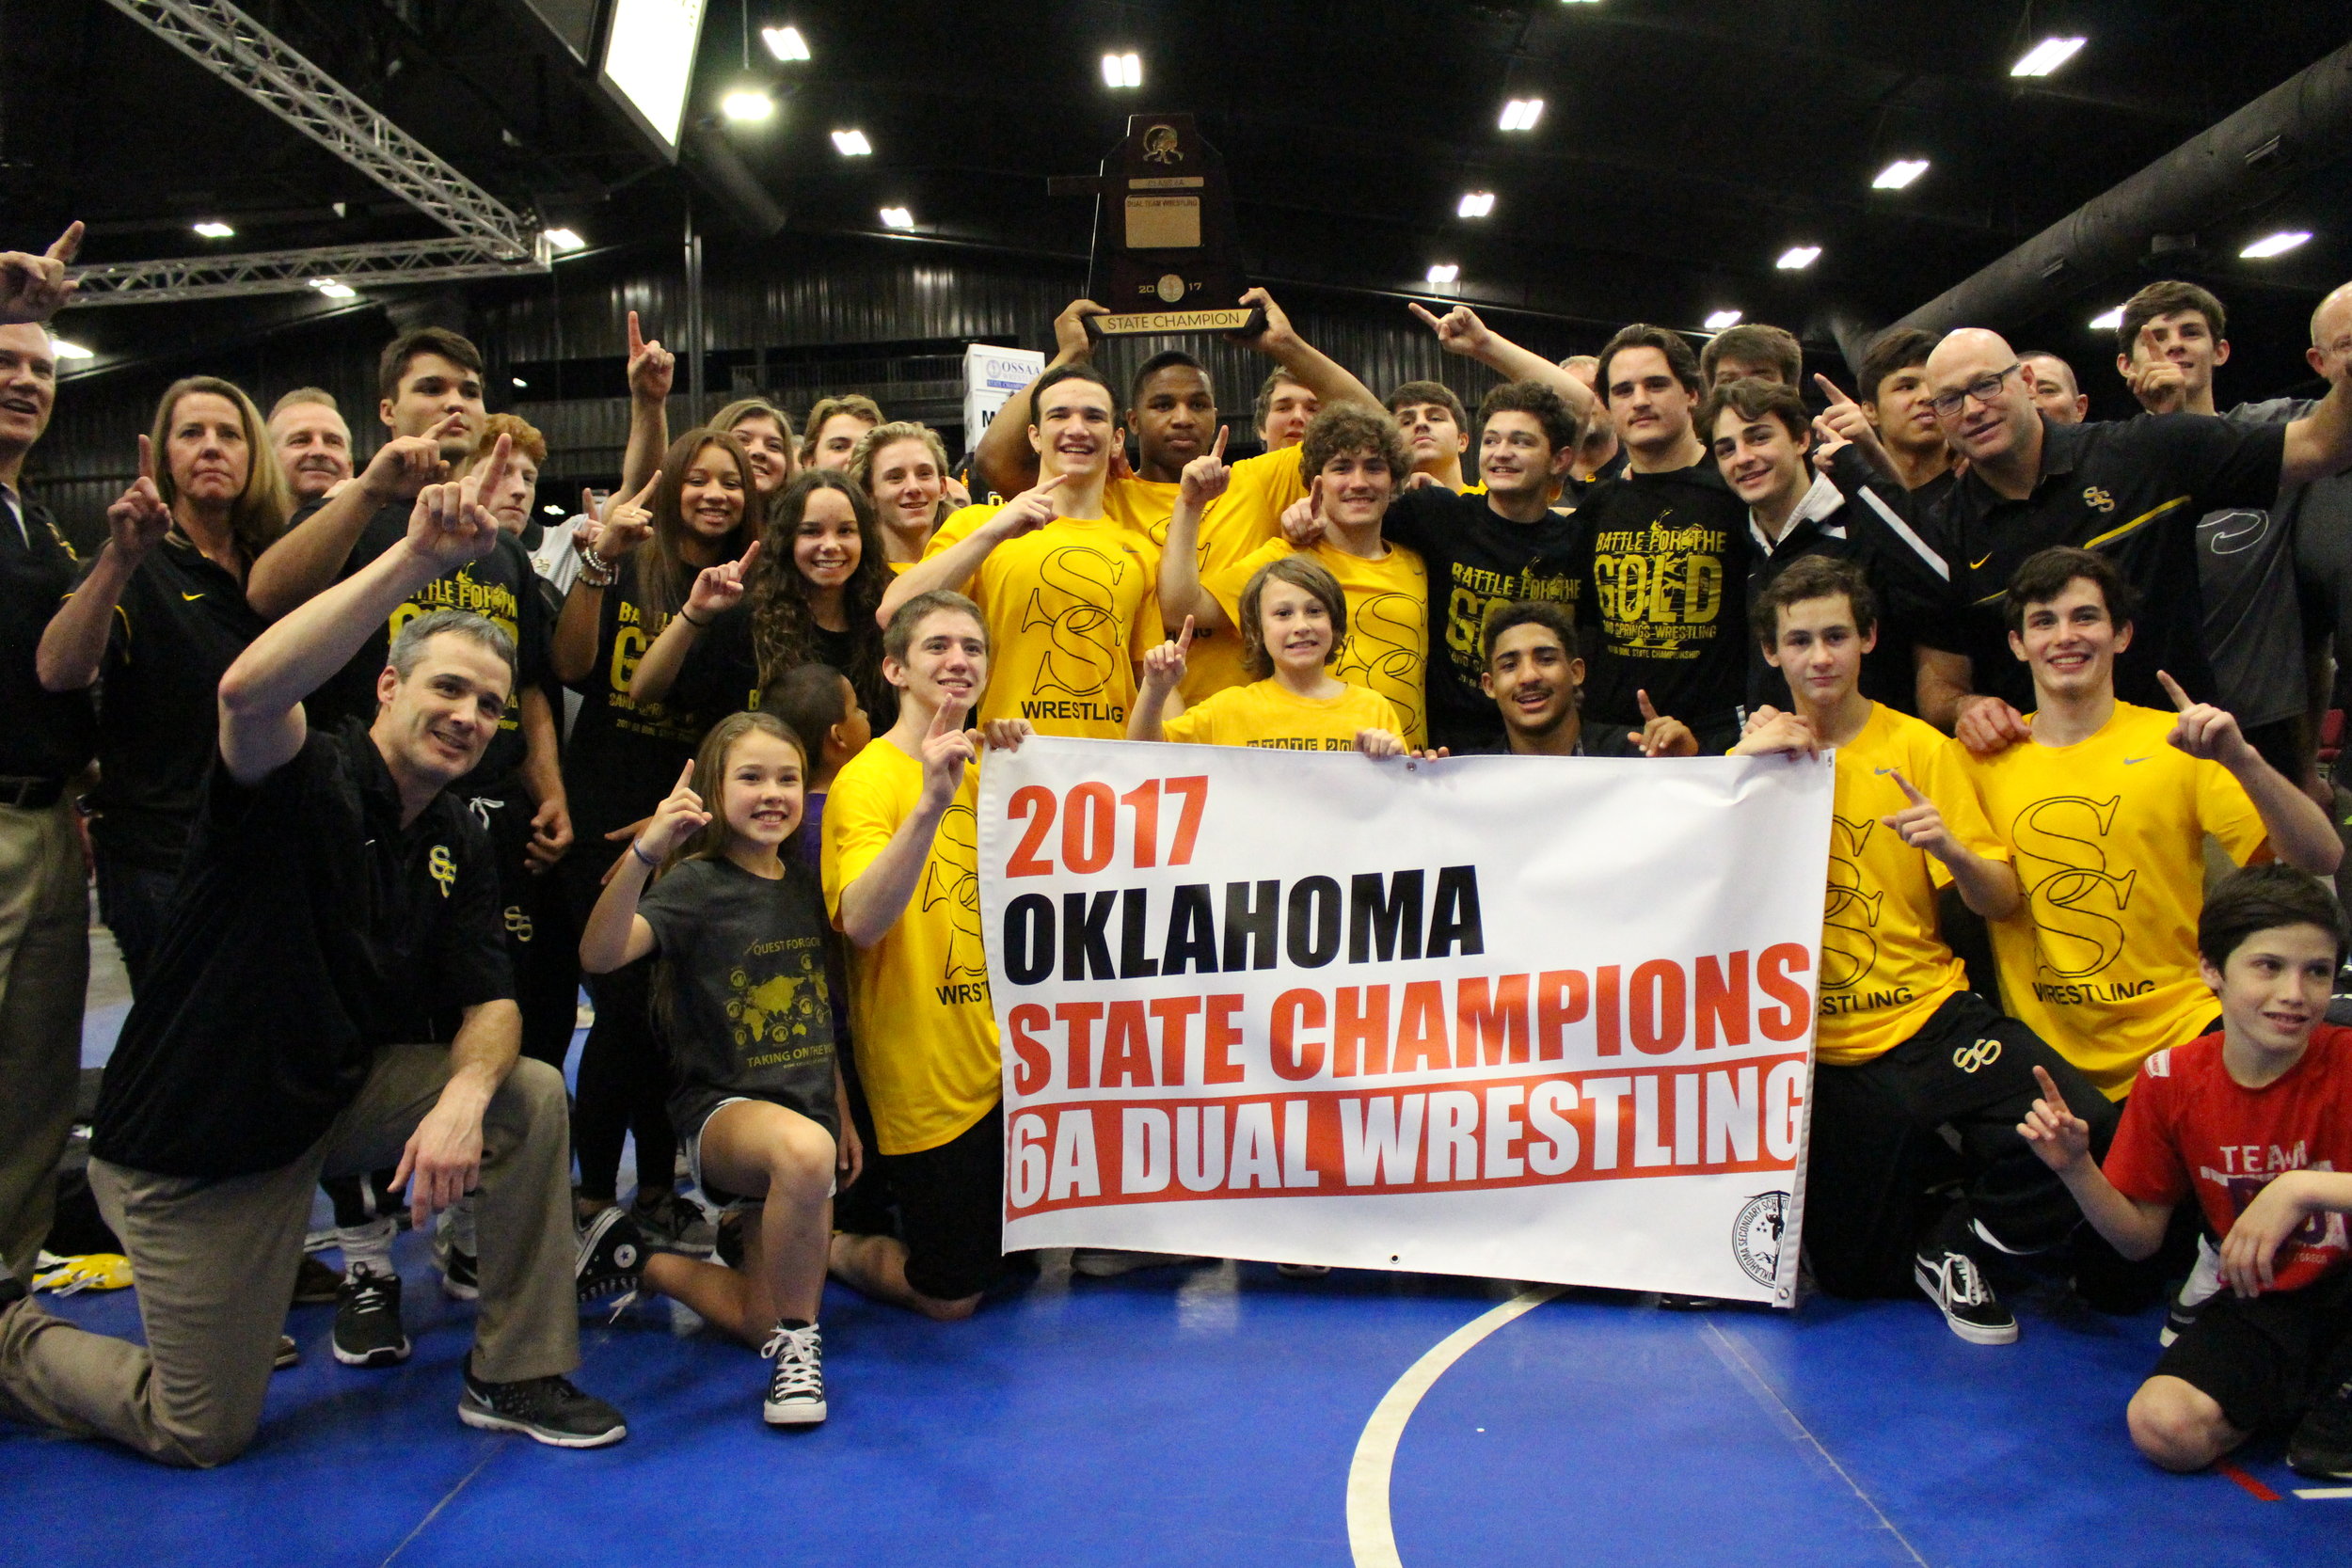  CPHS Head Coach Kelly Smith led the Sandites to their first ever Dual State Championship in 2017, and first school State Title in any sport since 1994. (Photo: Scott Emigh). 